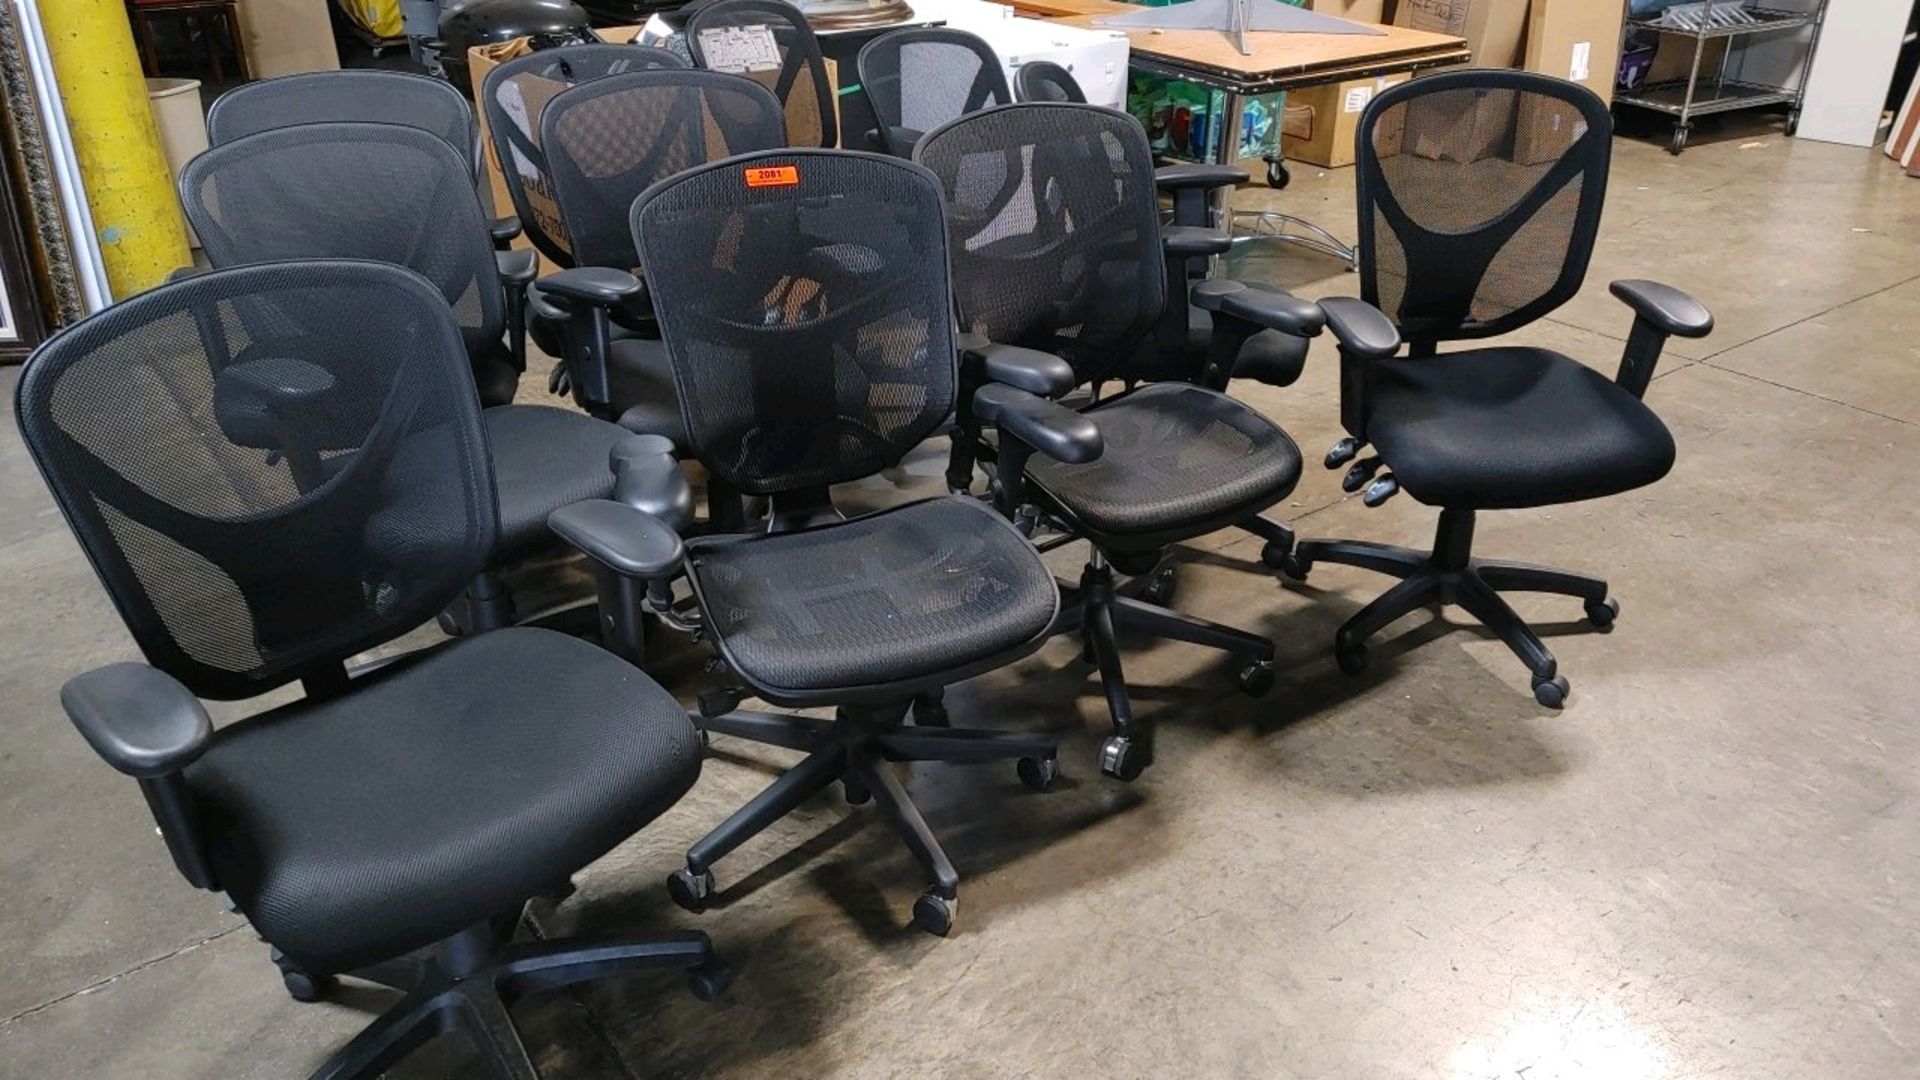 VARIOUS TASK OFFICE CHAIRS ON WHEELS QTY: 11, LOCATED: 3821 N. FRATNEY STREET MILWAUKEE, WI 53212